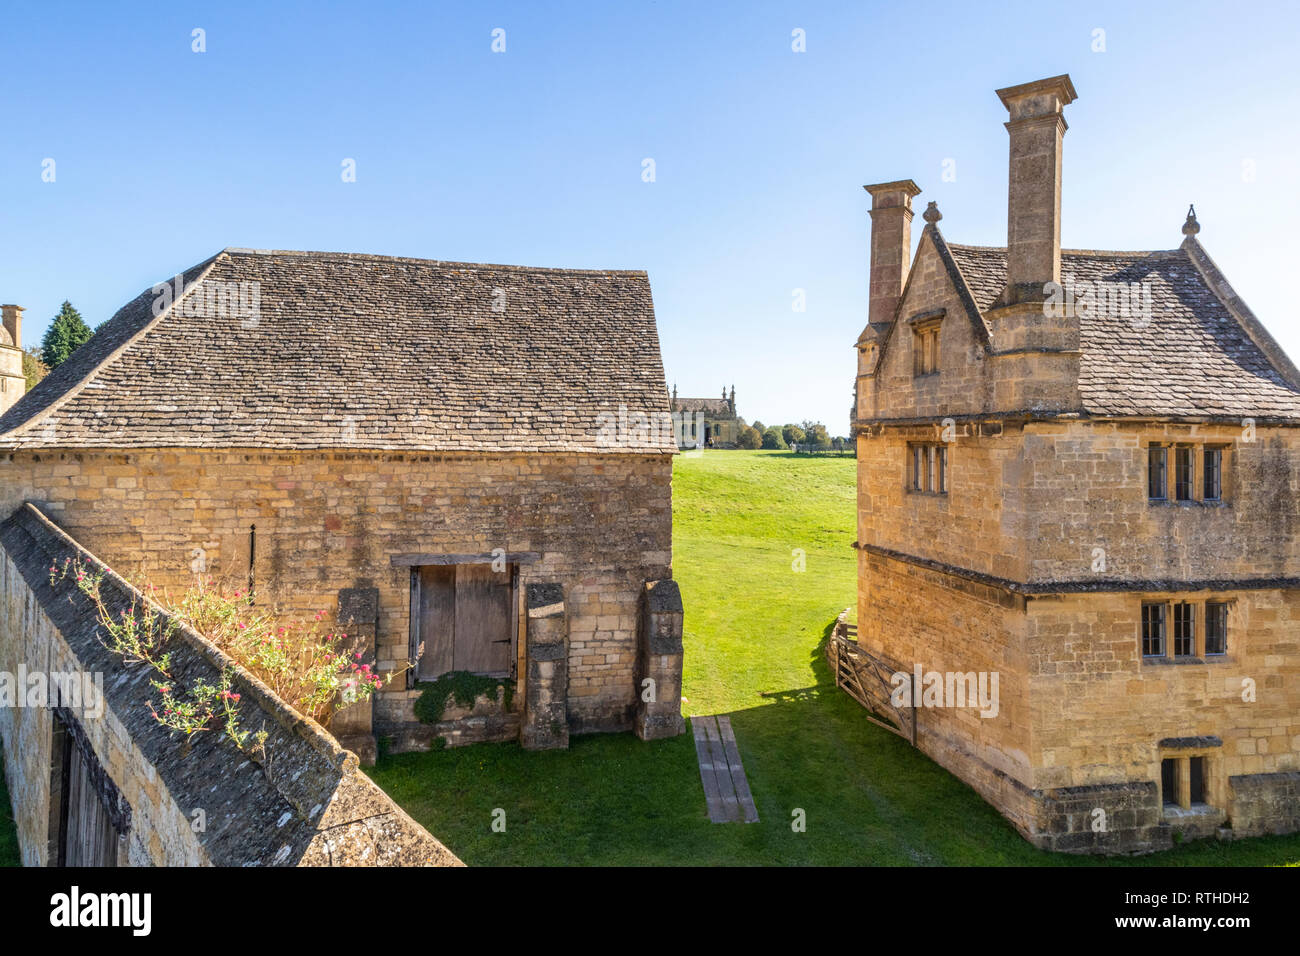 Some of the remining buildings of Campden House built by Sir Baptist Hicks in 1613 in the Cotswold town of Chipping Campden, Gloucestershire UK Stock Photo